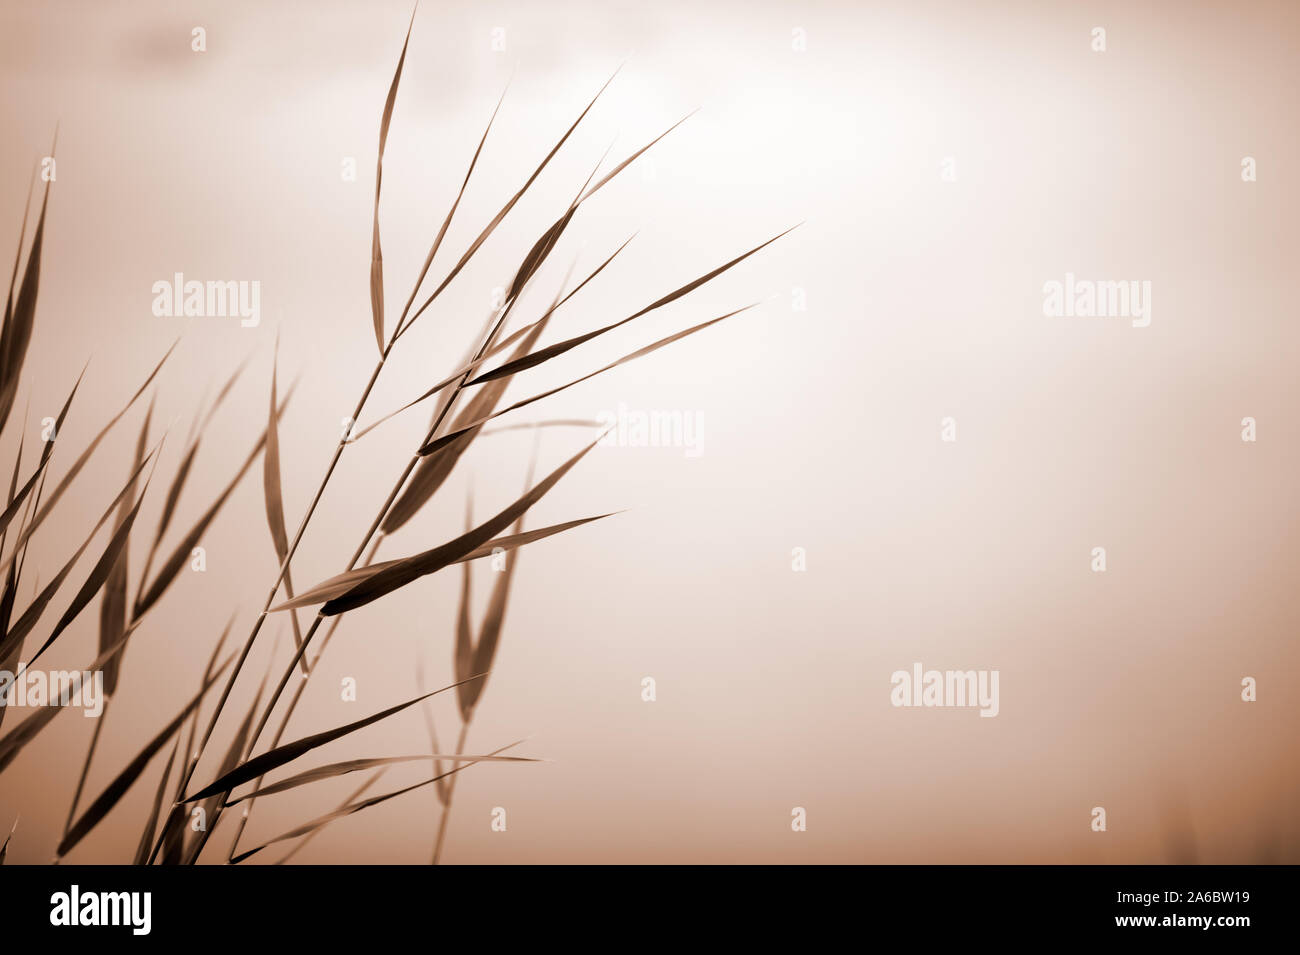 Common reed (Phragmites australis). Selective focus and very shallow depth of field. Duotone. Stock Photo